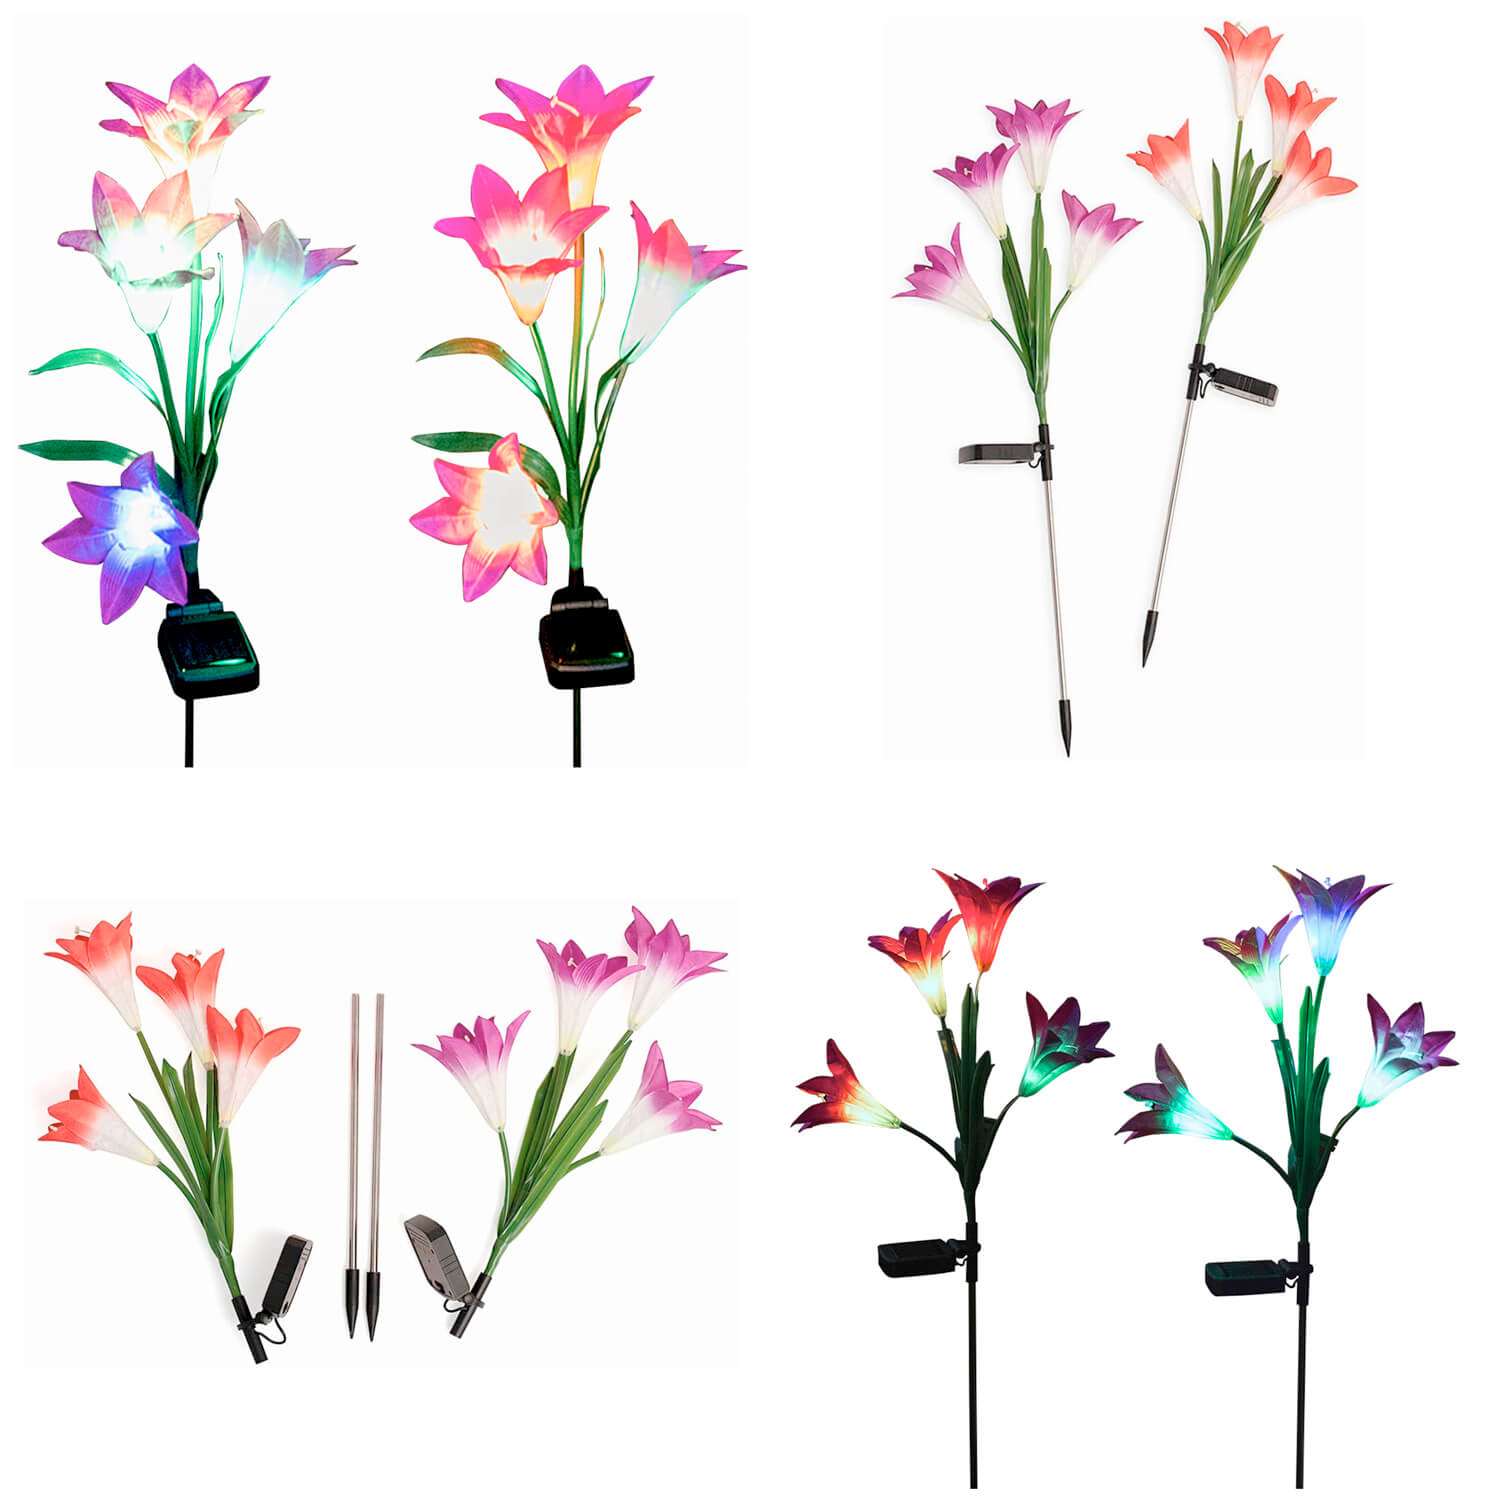 Garden Decor for colorful lights to display through faux lily flowers solar powered 